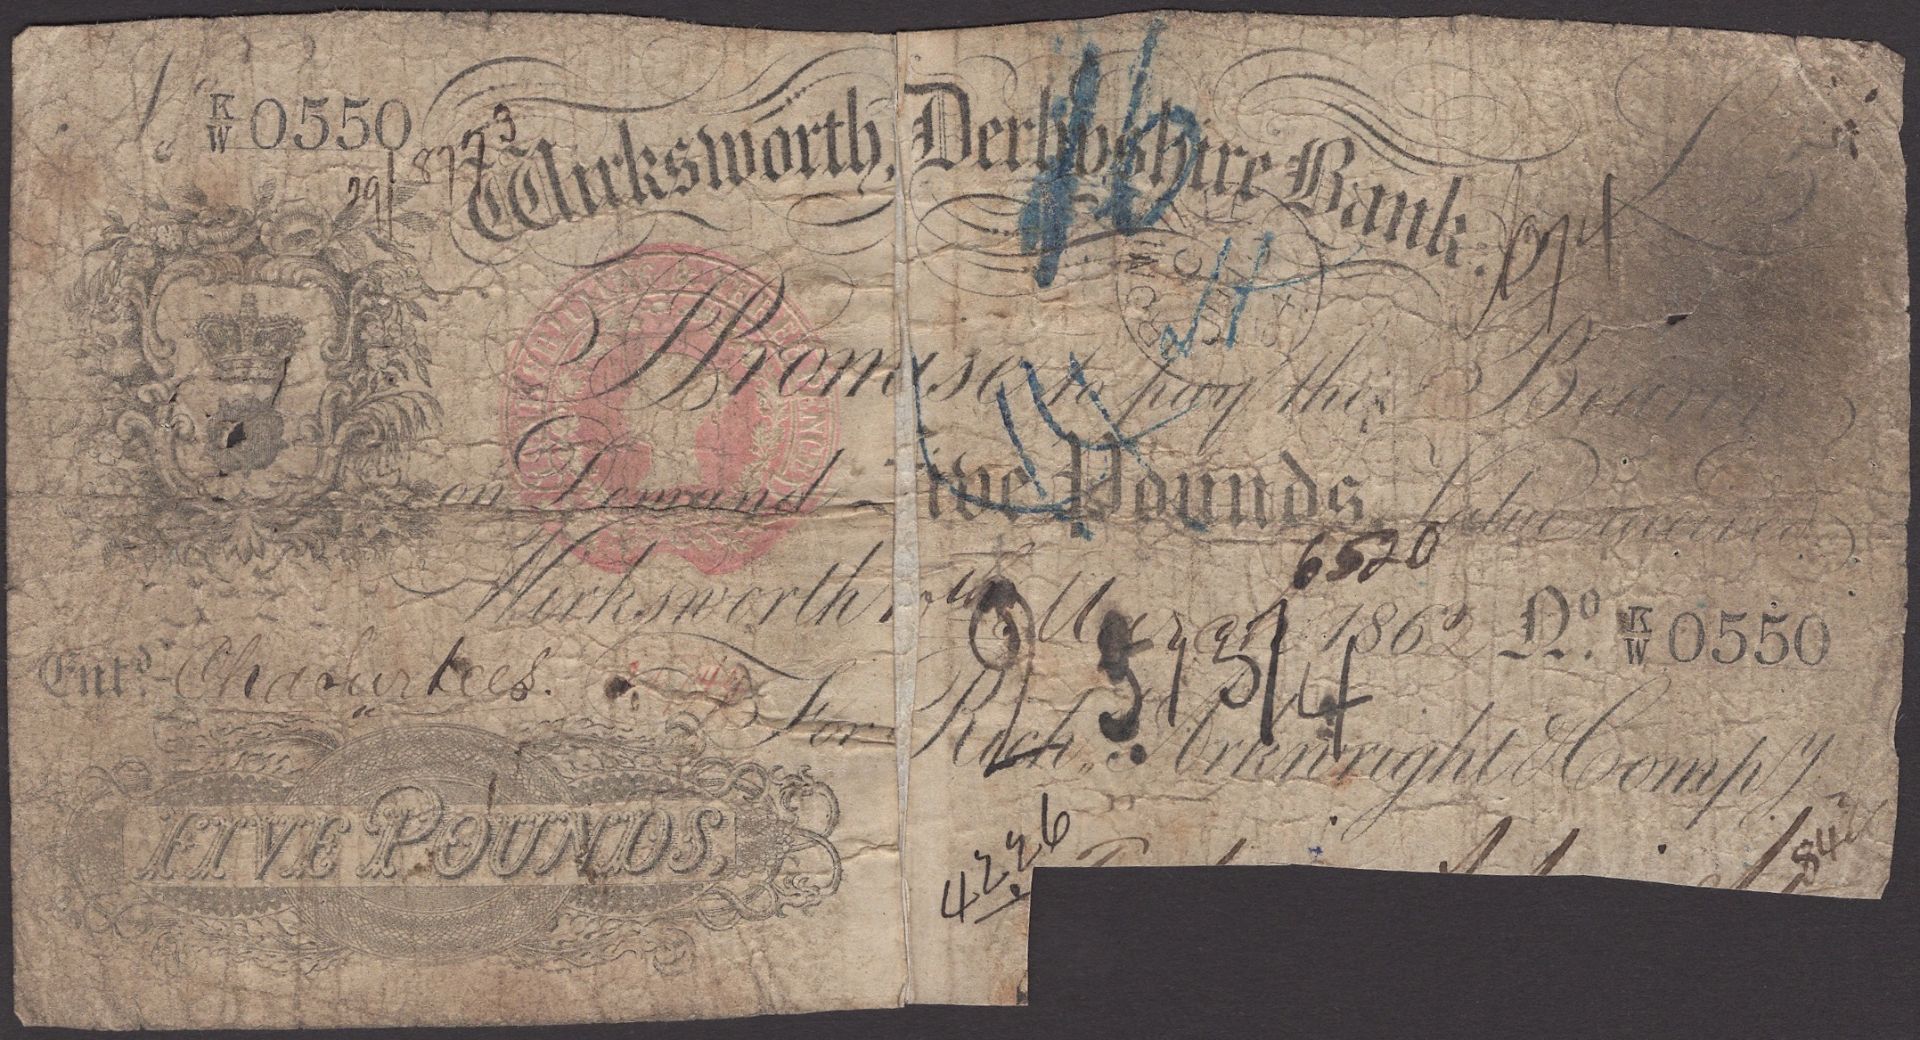 Wirksworth, Derbyshire Bank, for Richd Arkwright & Compy, Â£5, 10 March 1862, serial number K...